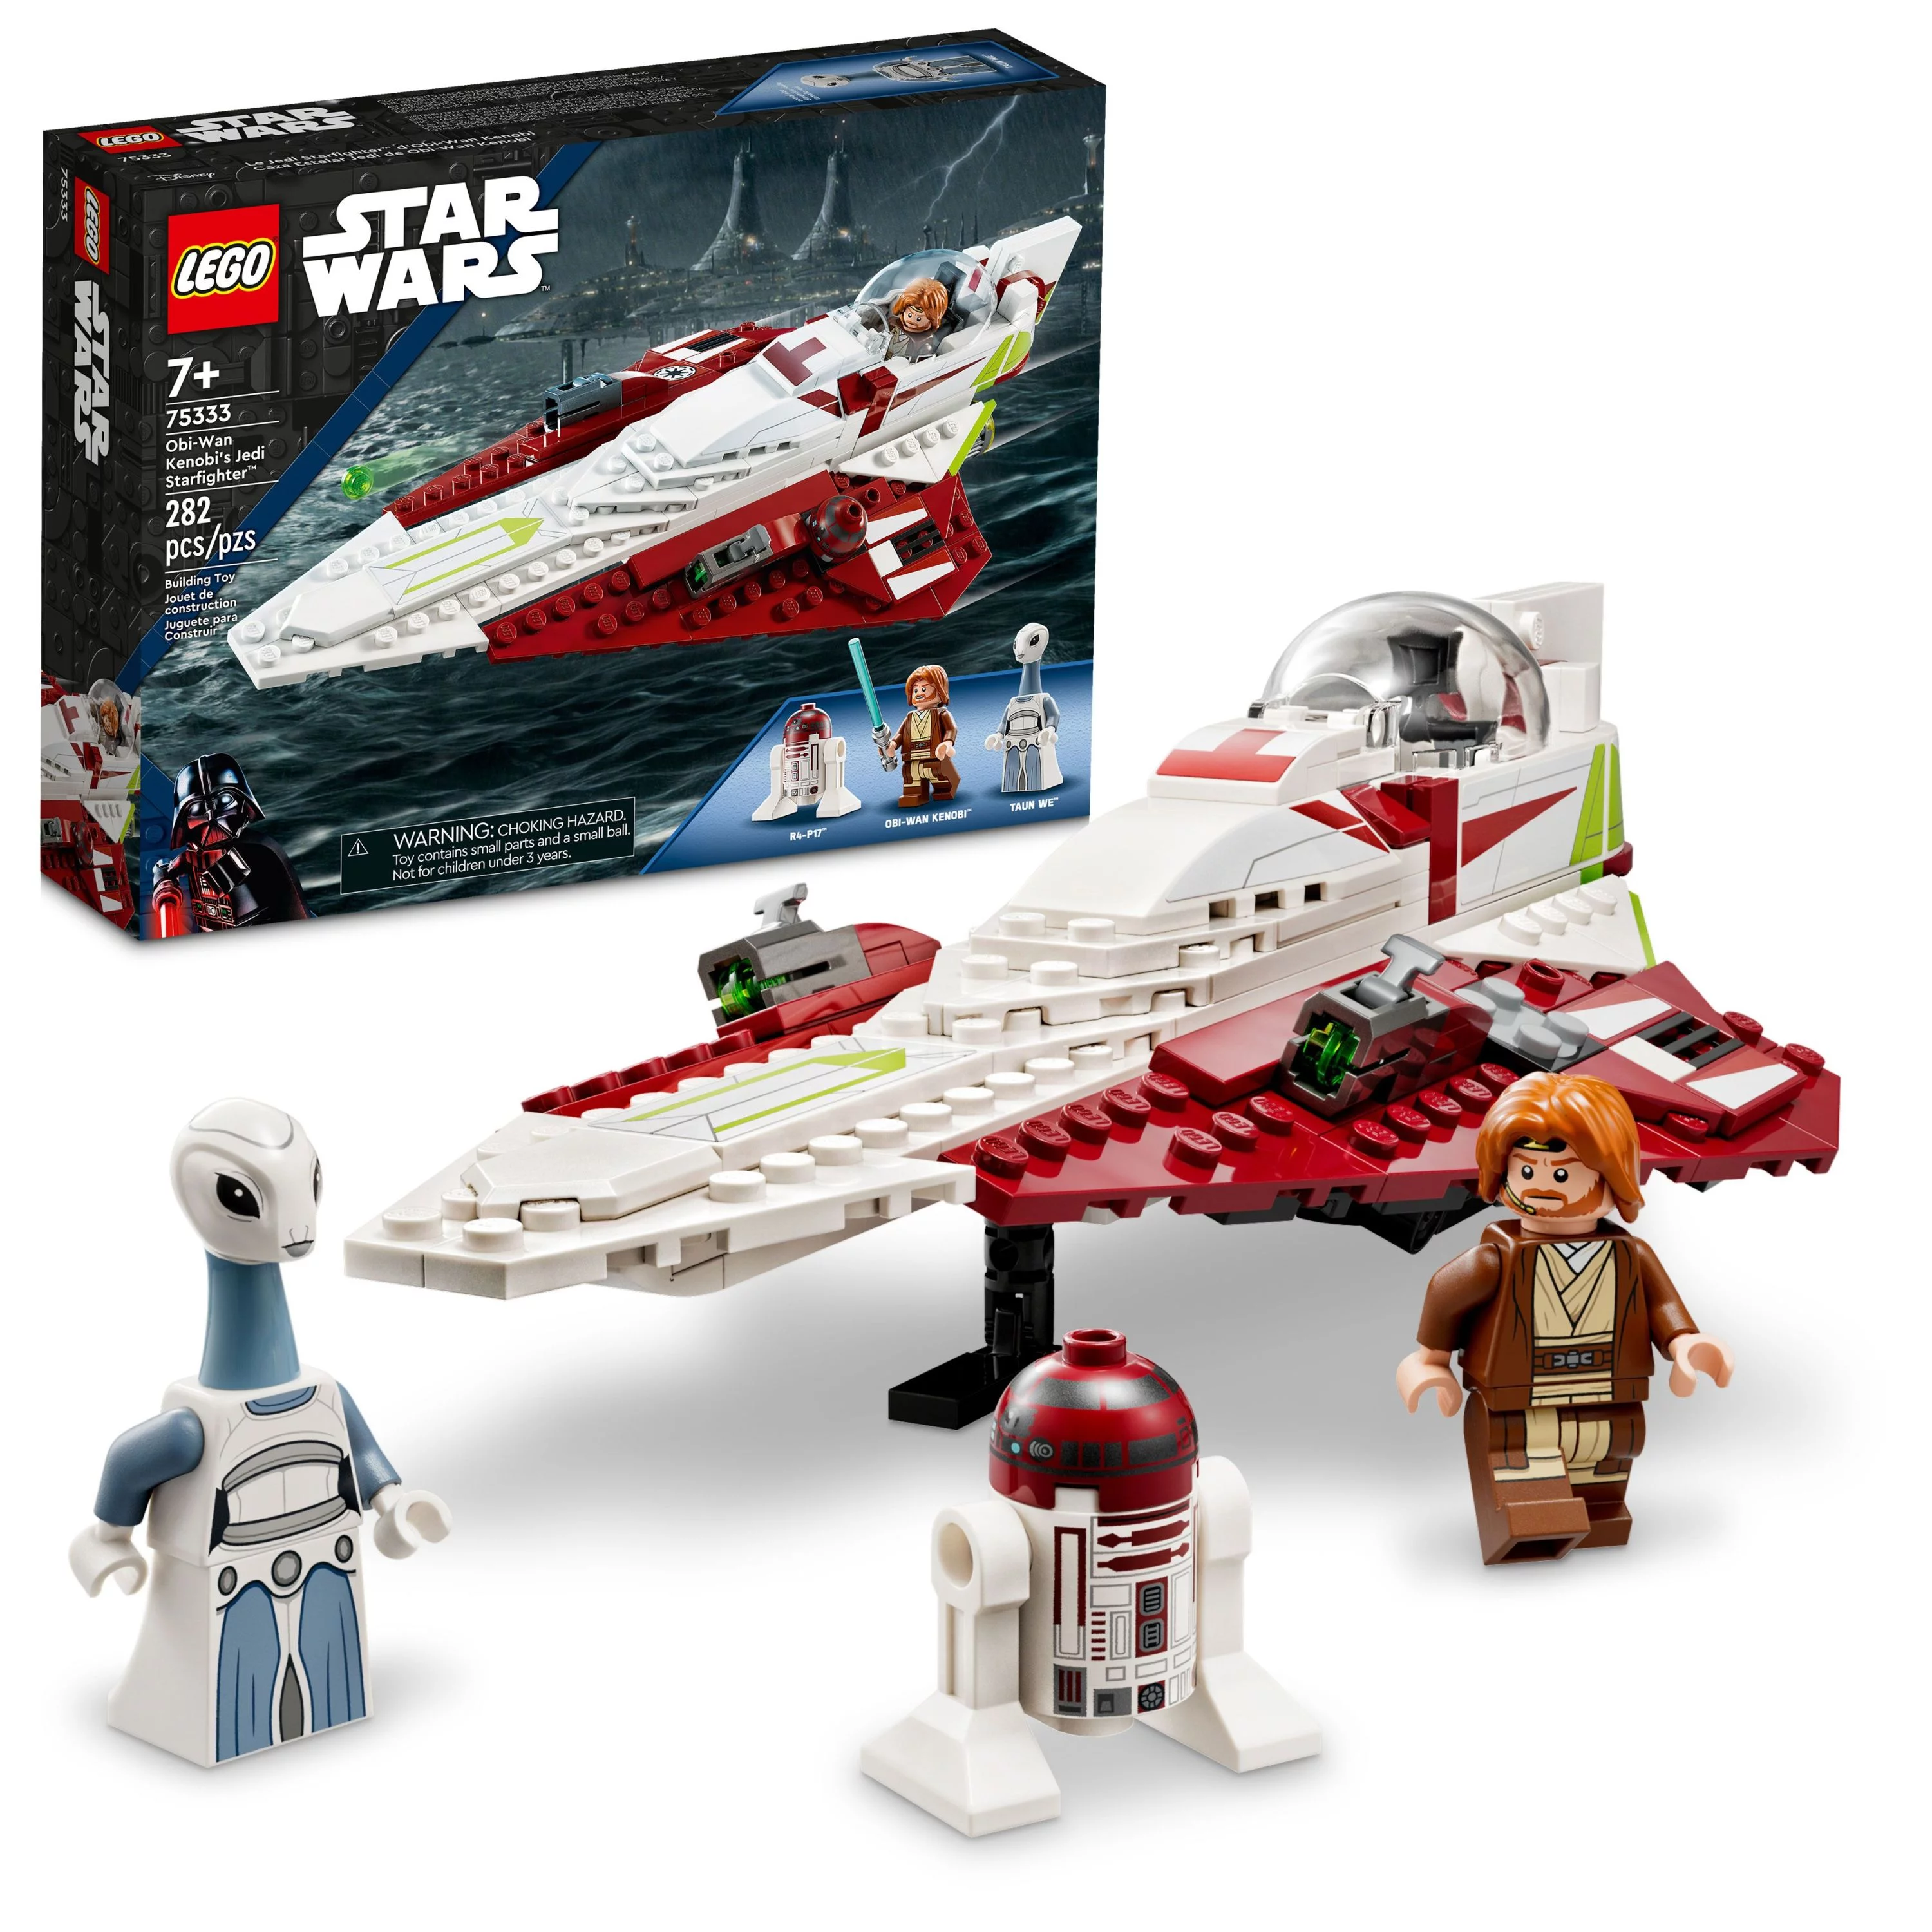 LEGO Star Wars Obi-Wan Kenobi’s Jedi Starfighter 75333, Attack of the Clones Building Set with Taun We Minifigure, Droid Figure and Lightsaber, Gift Idea for Grandchildren or Star Wars Fans Ages 7+